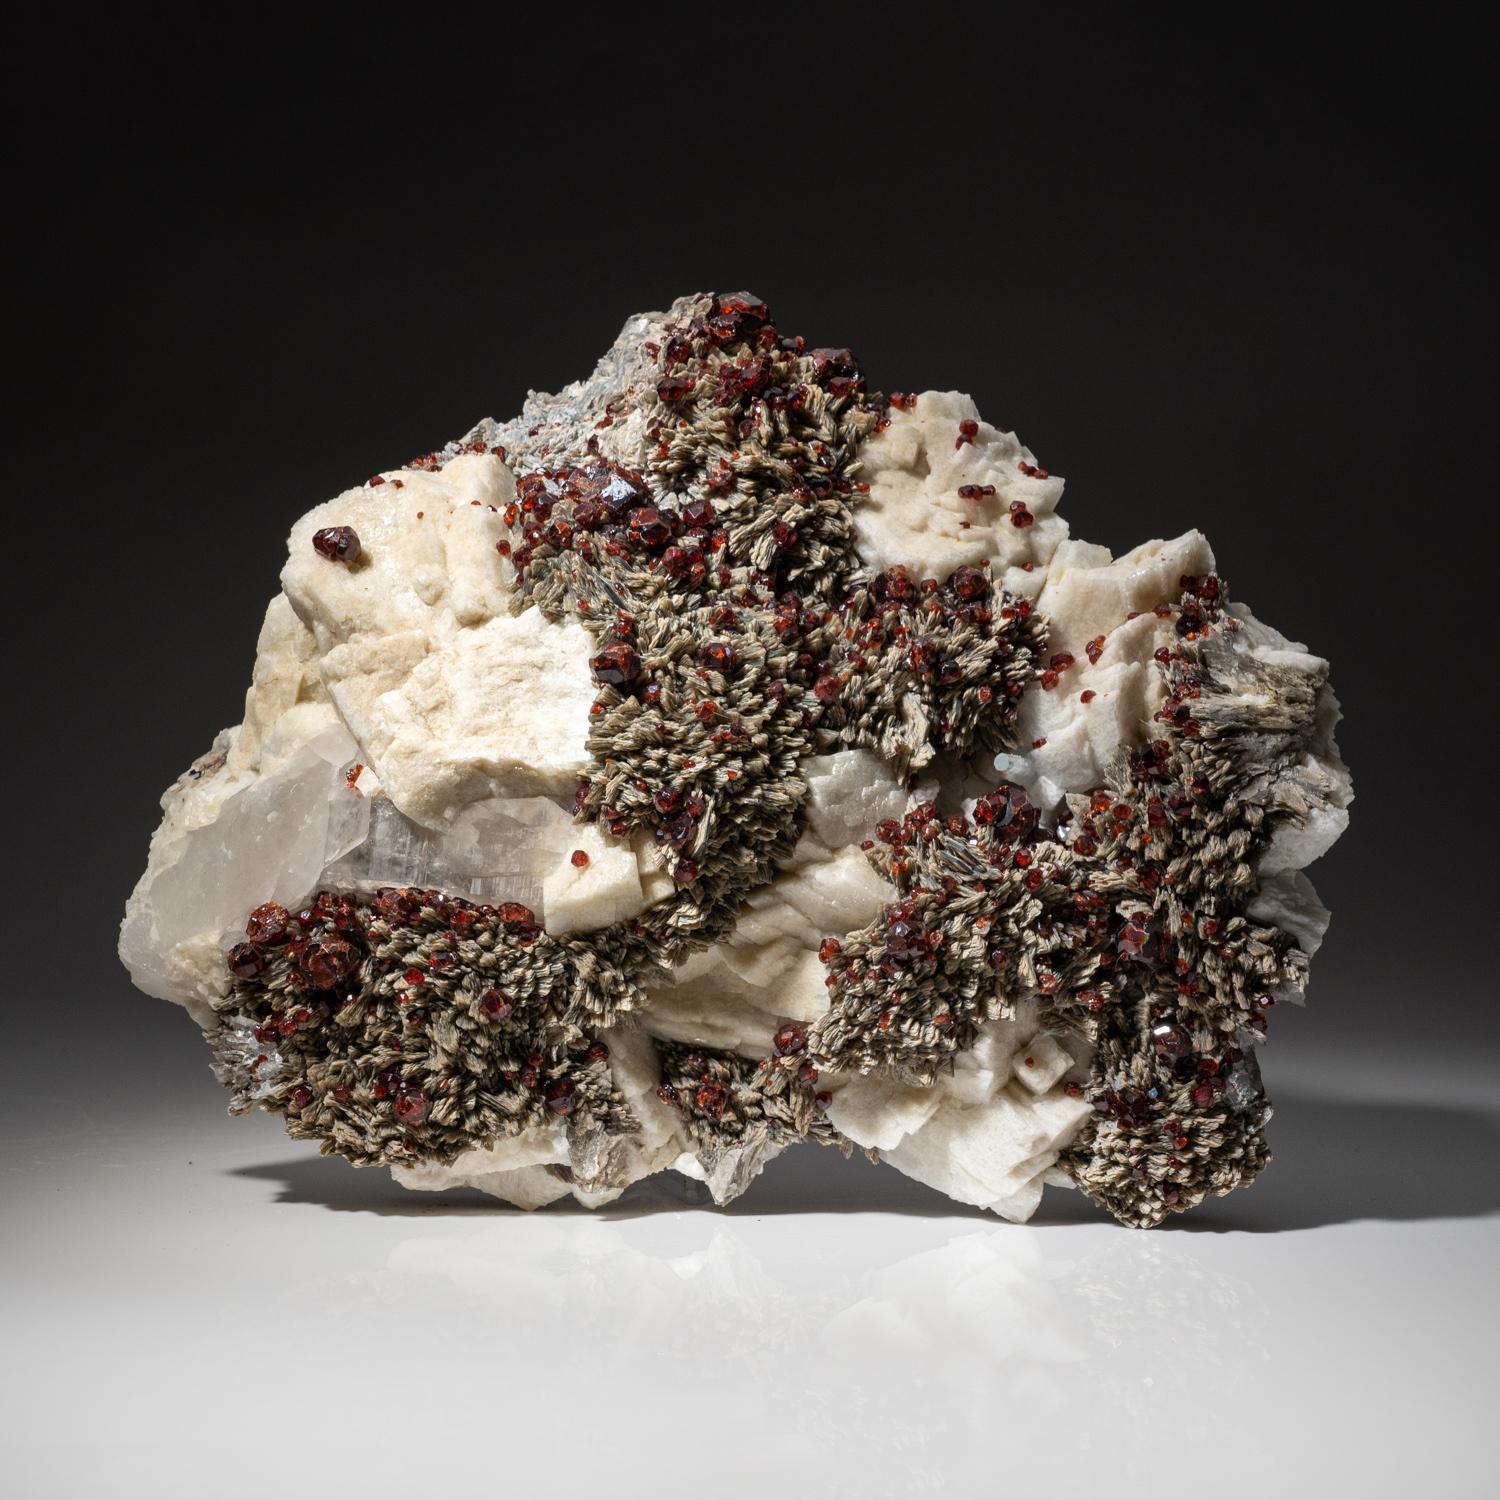 From Tongbei-Yunling District, Fujian Province, China

Cluster of transparent lustrous deep red spessartine garnet cluster on microline matrix with bladed muscovite crystals.

6 lbs, 9 x 2.5 x 8 inches